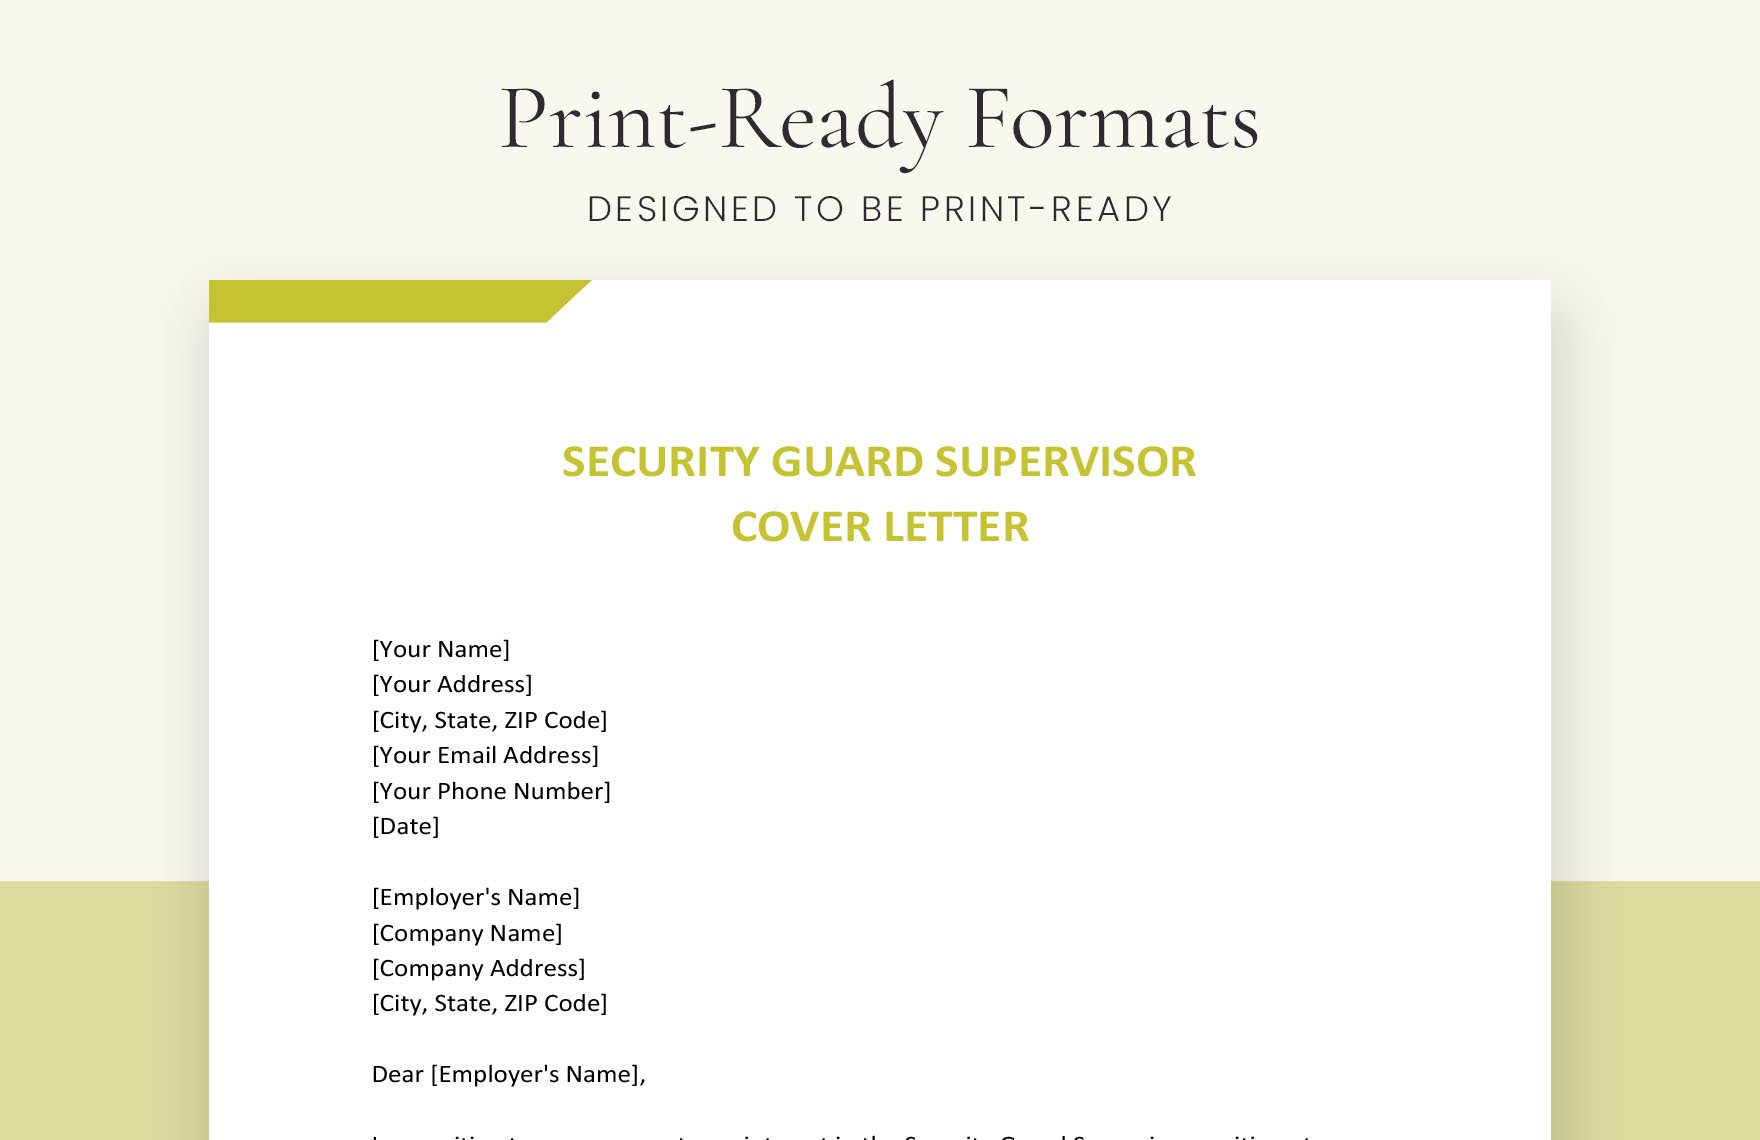 Security Guard Supervisor Cover Letter